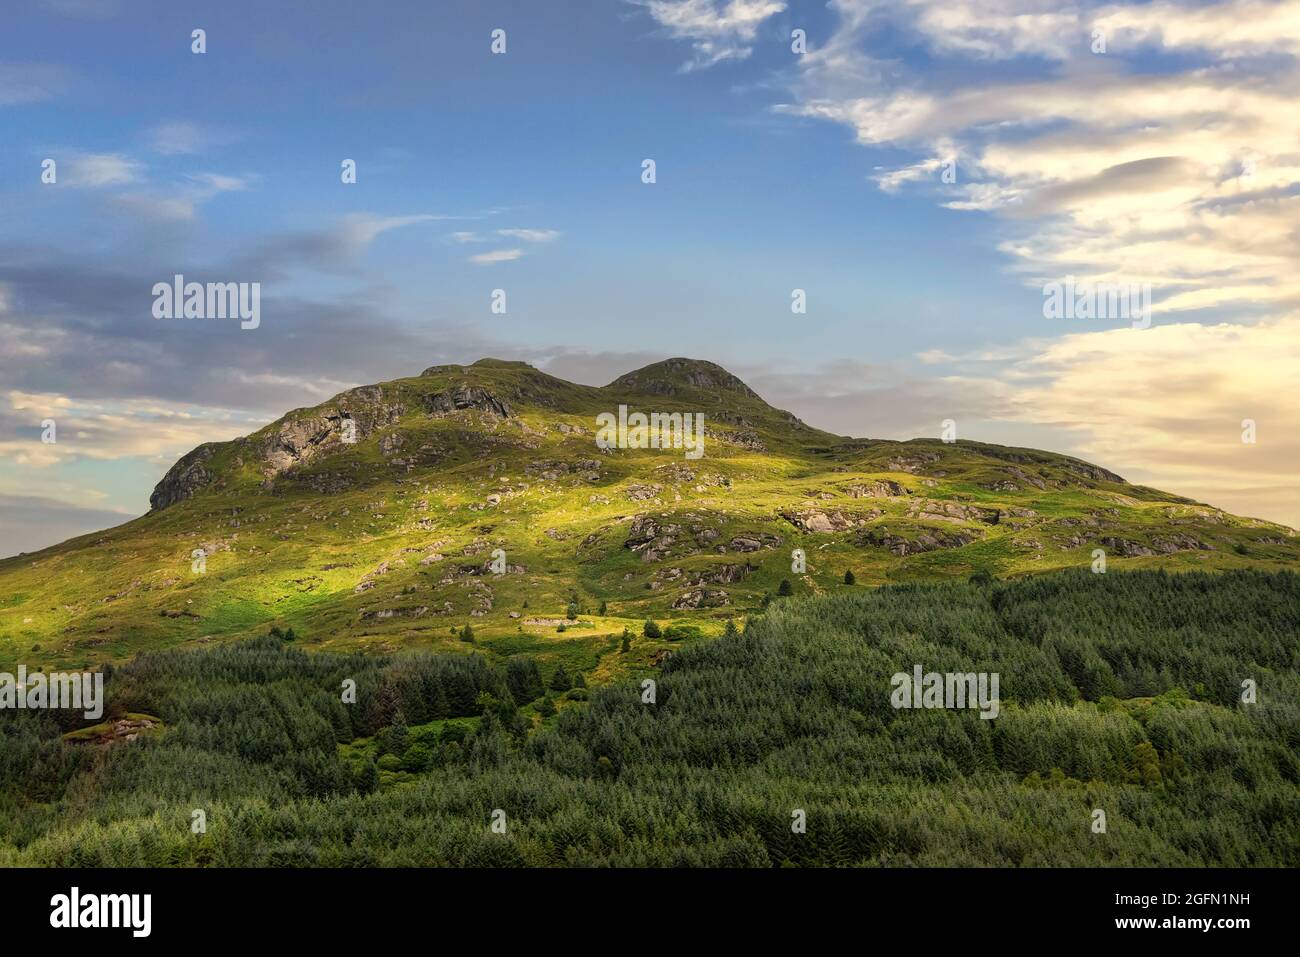 Sun starting to set on the rural Scottish Highlands in Scotland Stock Photo